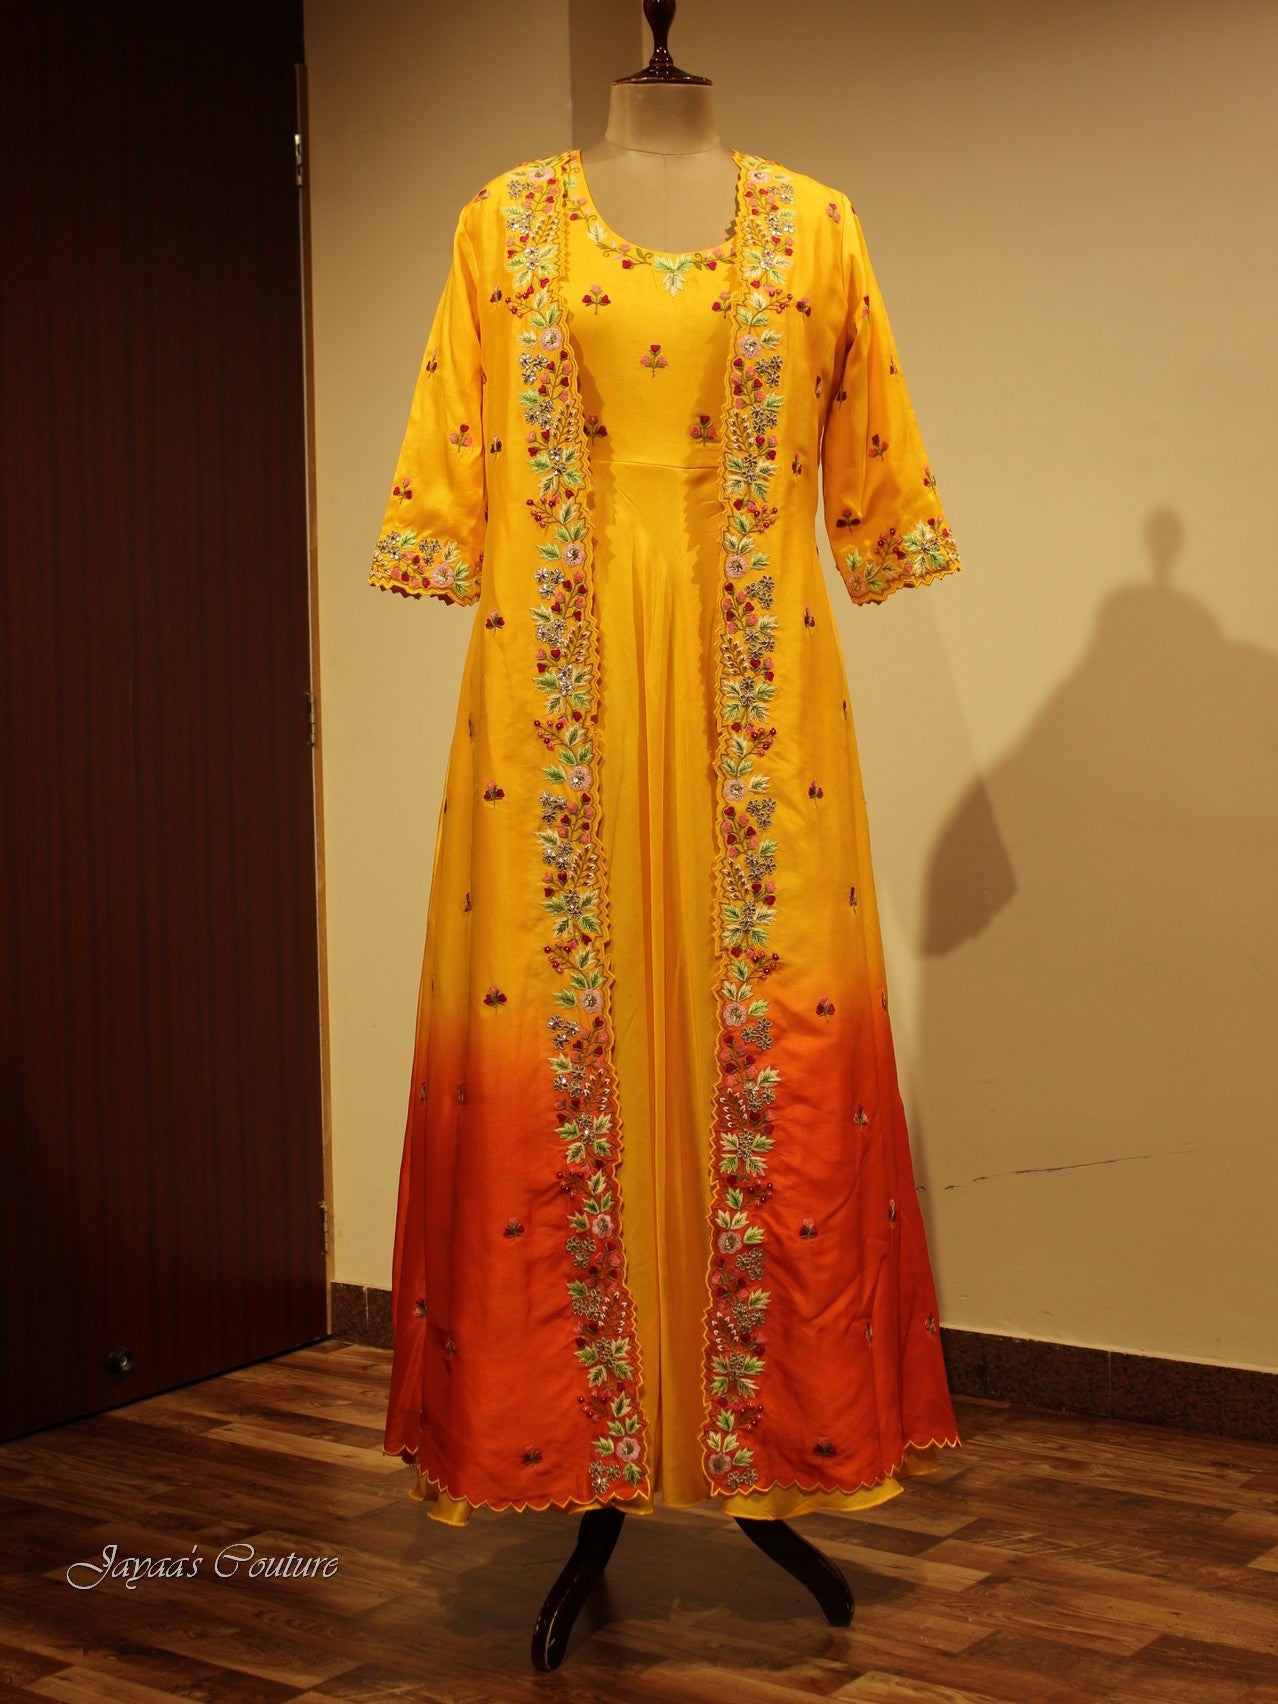 Orange shaded gown with shrug